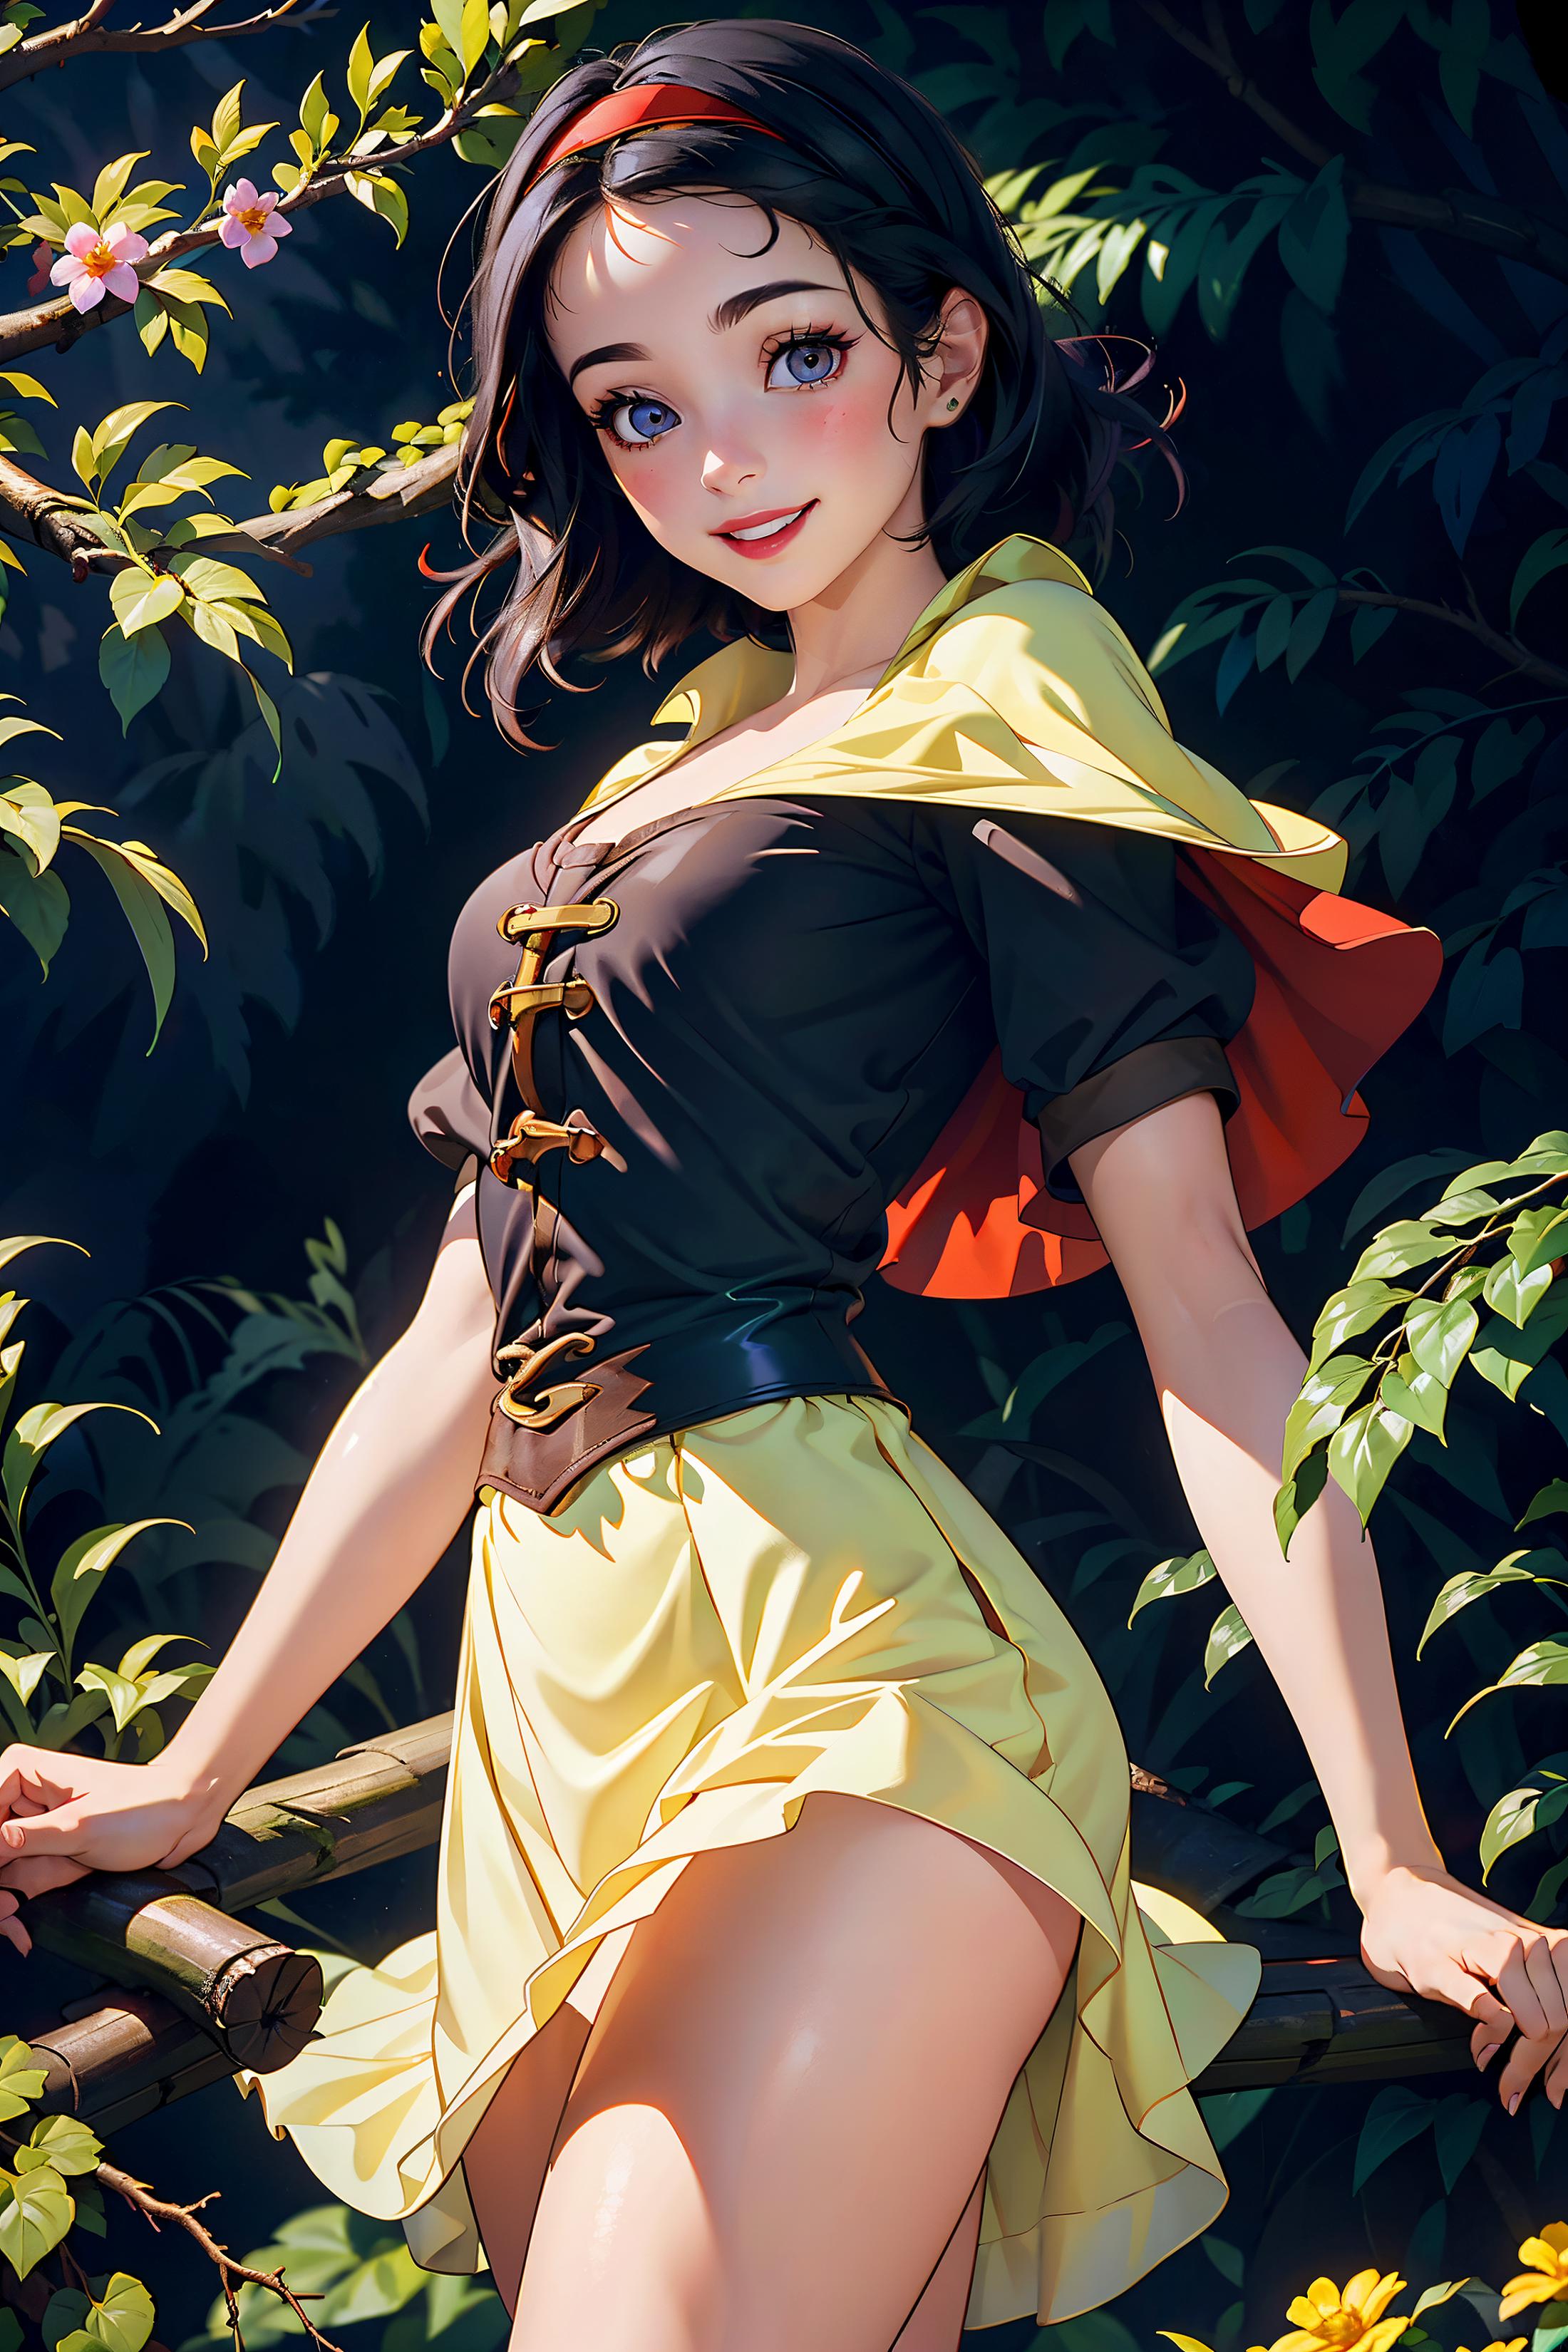 Snow White image by qbaner